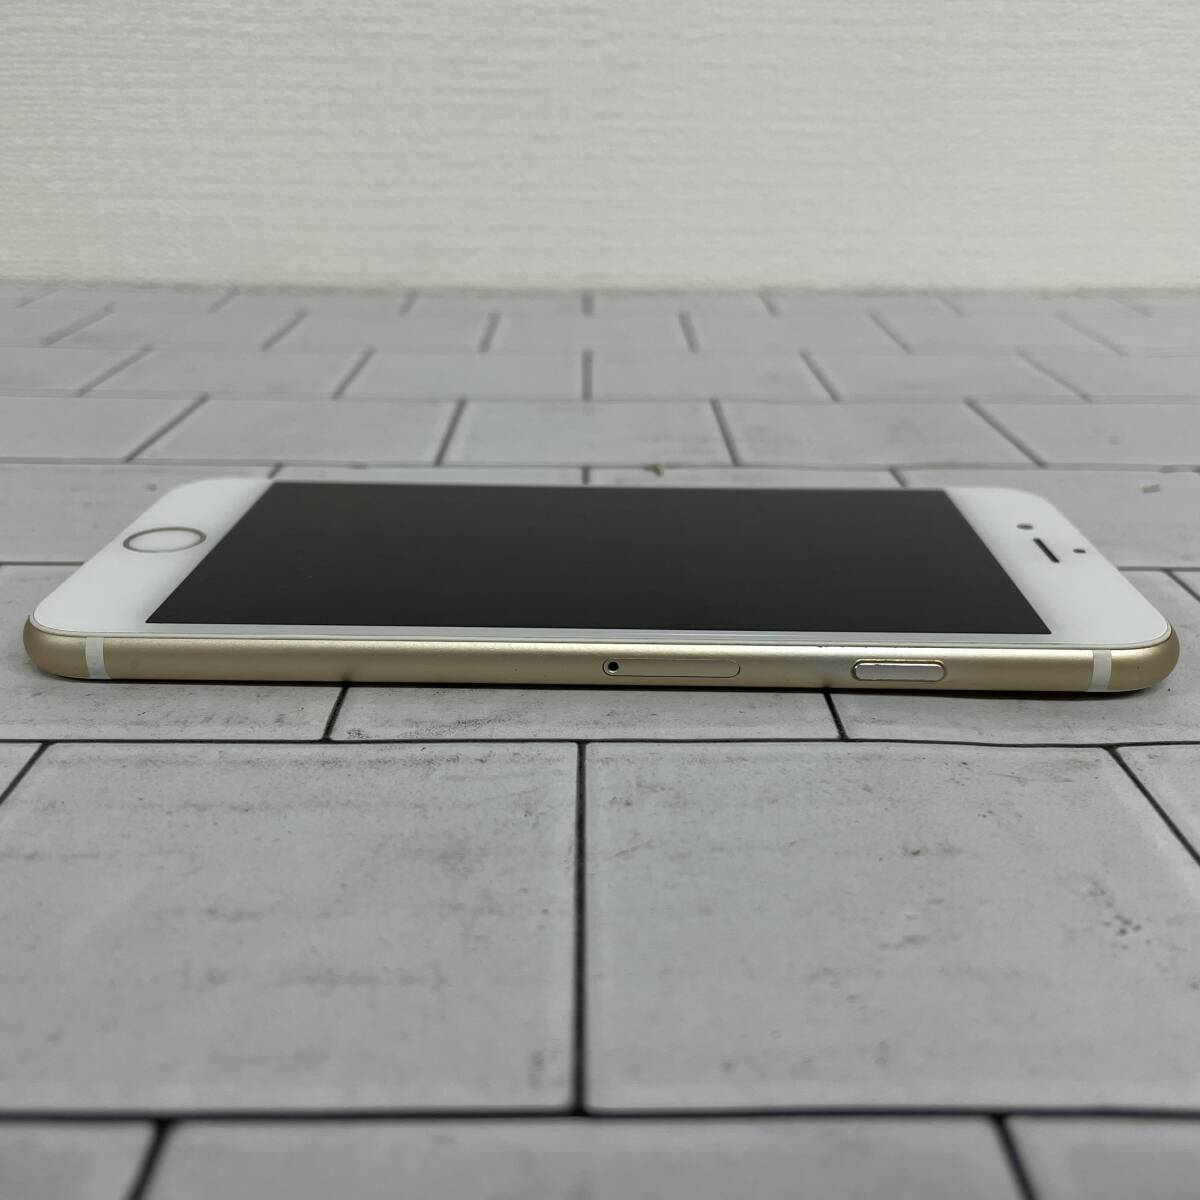 E049-M24-14 ◎ Apple iPhone6 16GB MG492J A A1586 Gold 付属品付き 通電確認済み_画像6